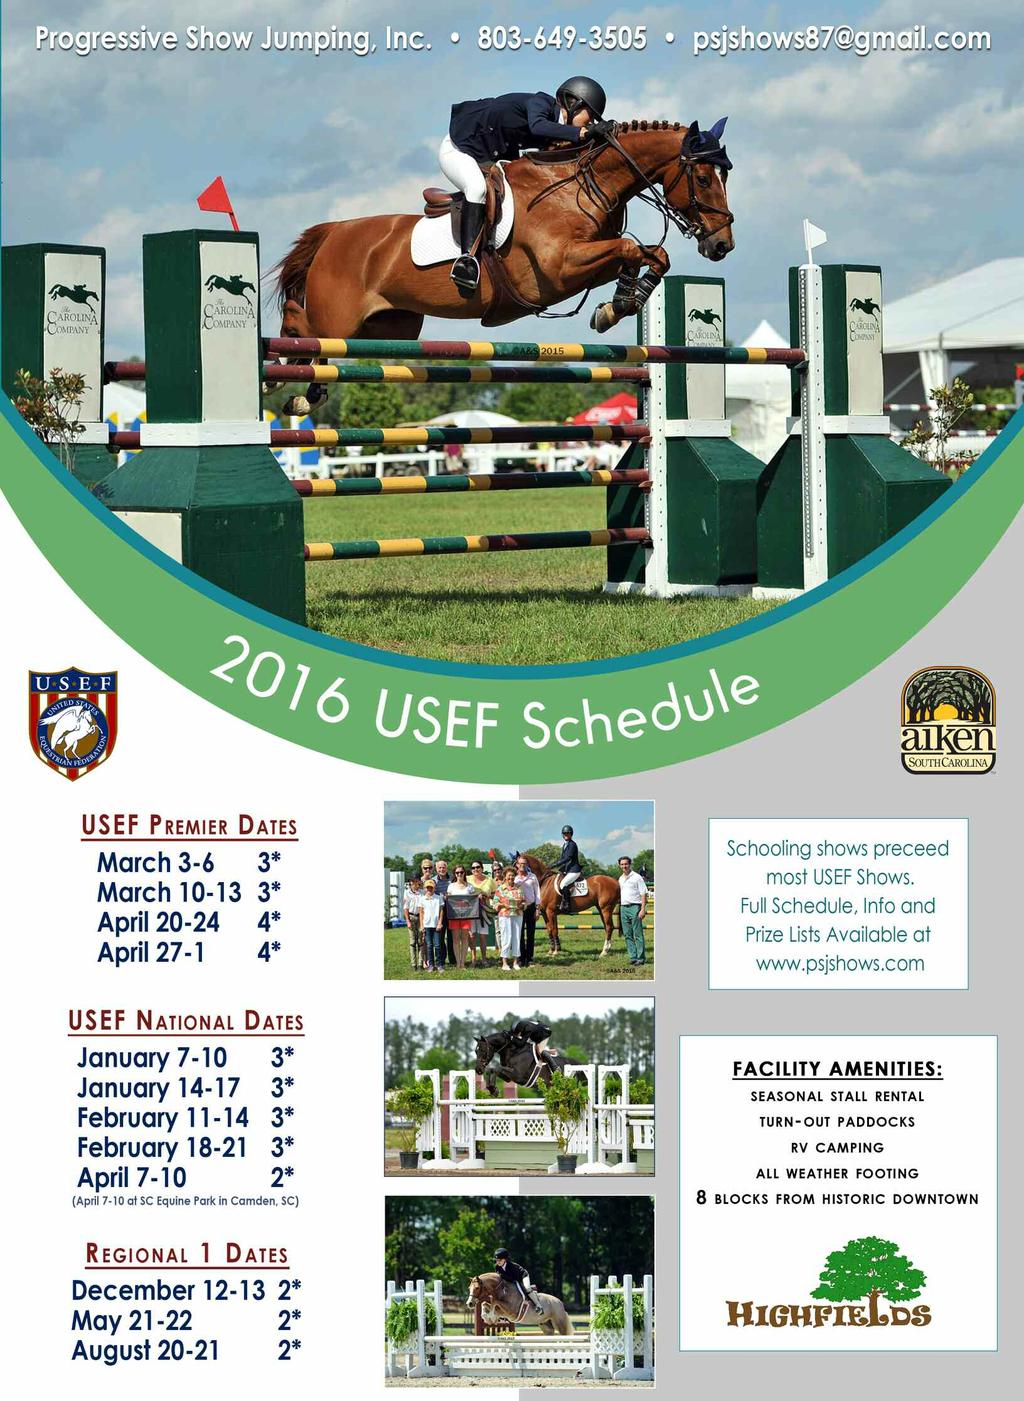 Management & Officials, Sanctioning & Closing Dates Aiken Fall Classic October 3-4, 2015 Closing Date: September 21 Sanctioned by: PSJ, SC, NC The following officials have accepted an invitation to